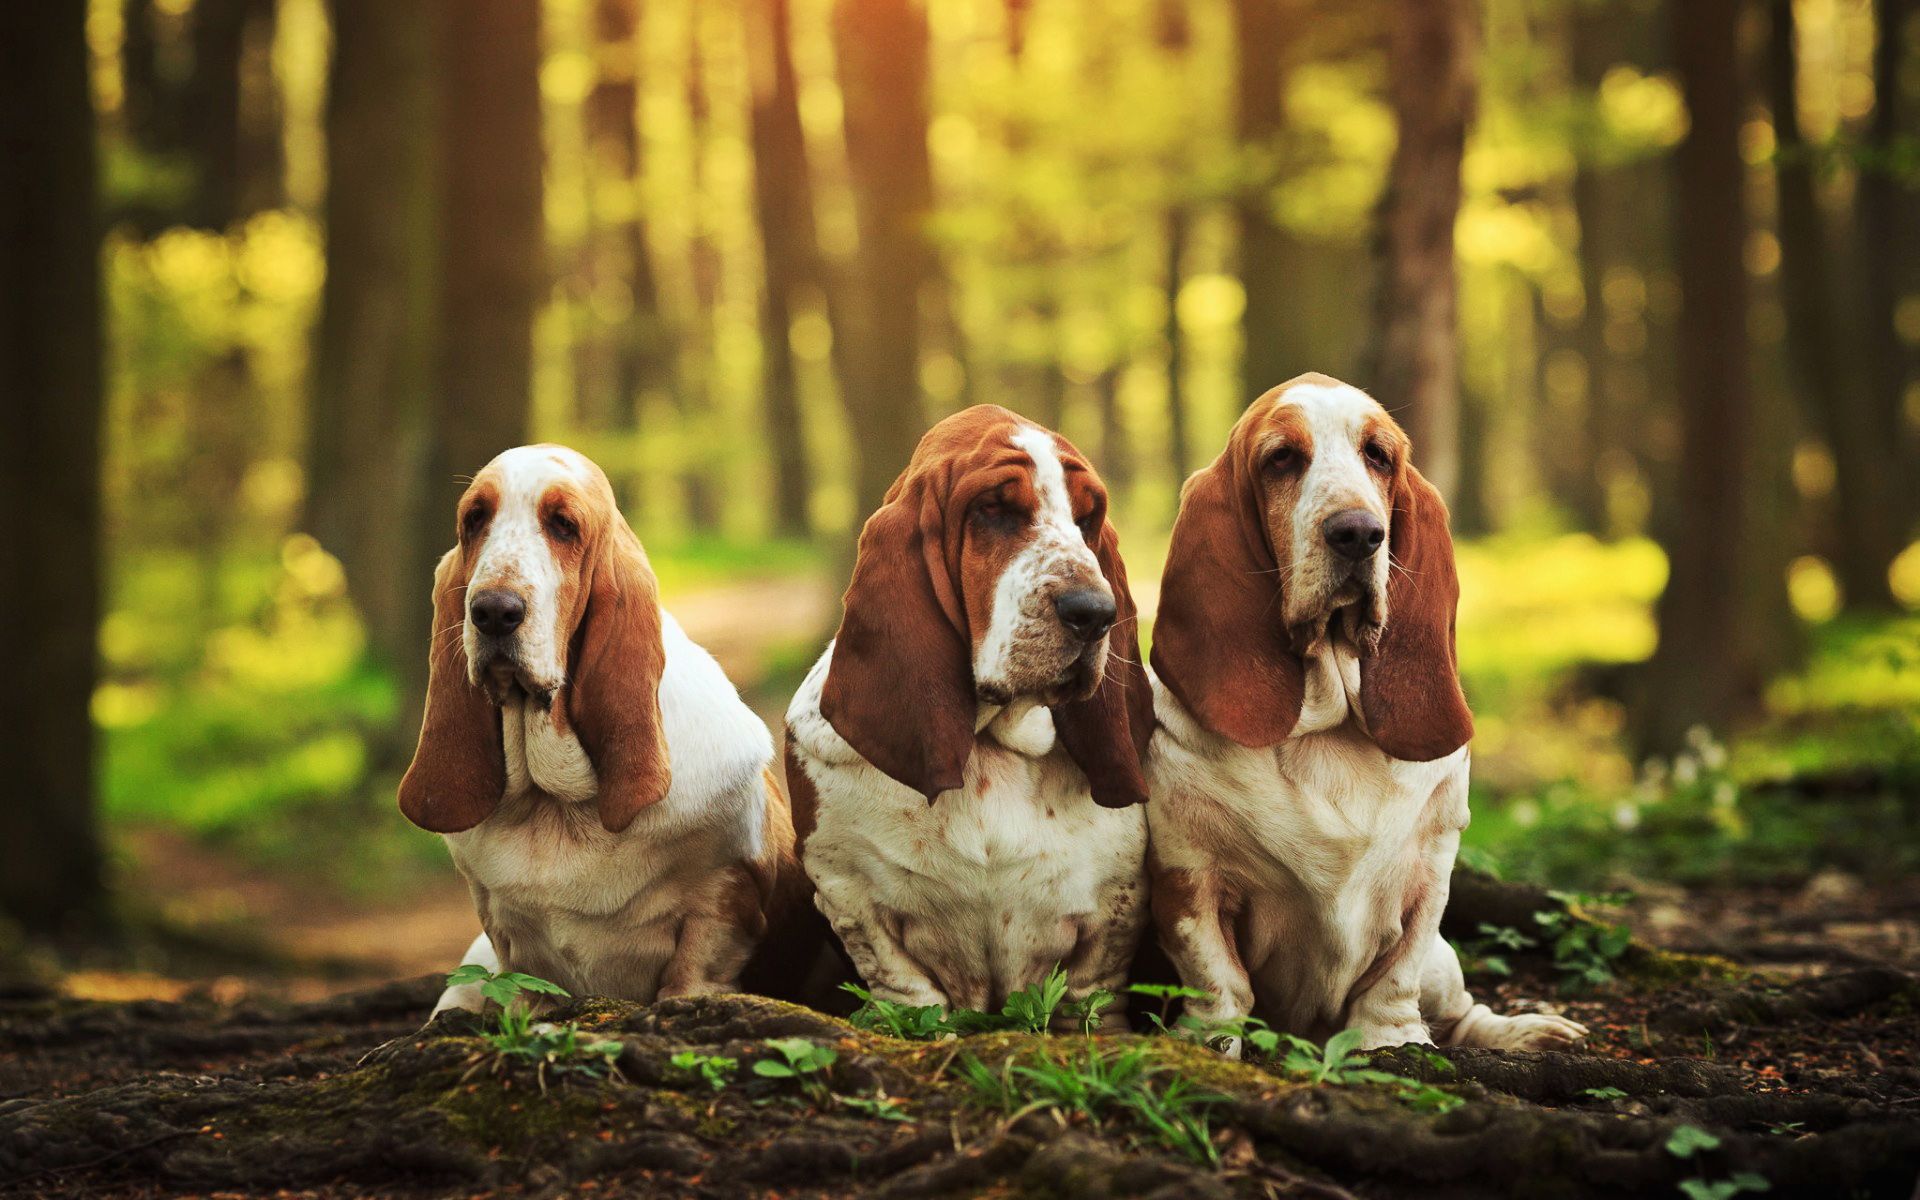 Download wallpaper Basset Hounds, forest, cute animals, family, pets, dogs, Basset Hounds Dog for desktop with resolution 1920x1200. High Quality HD picture wallpaper